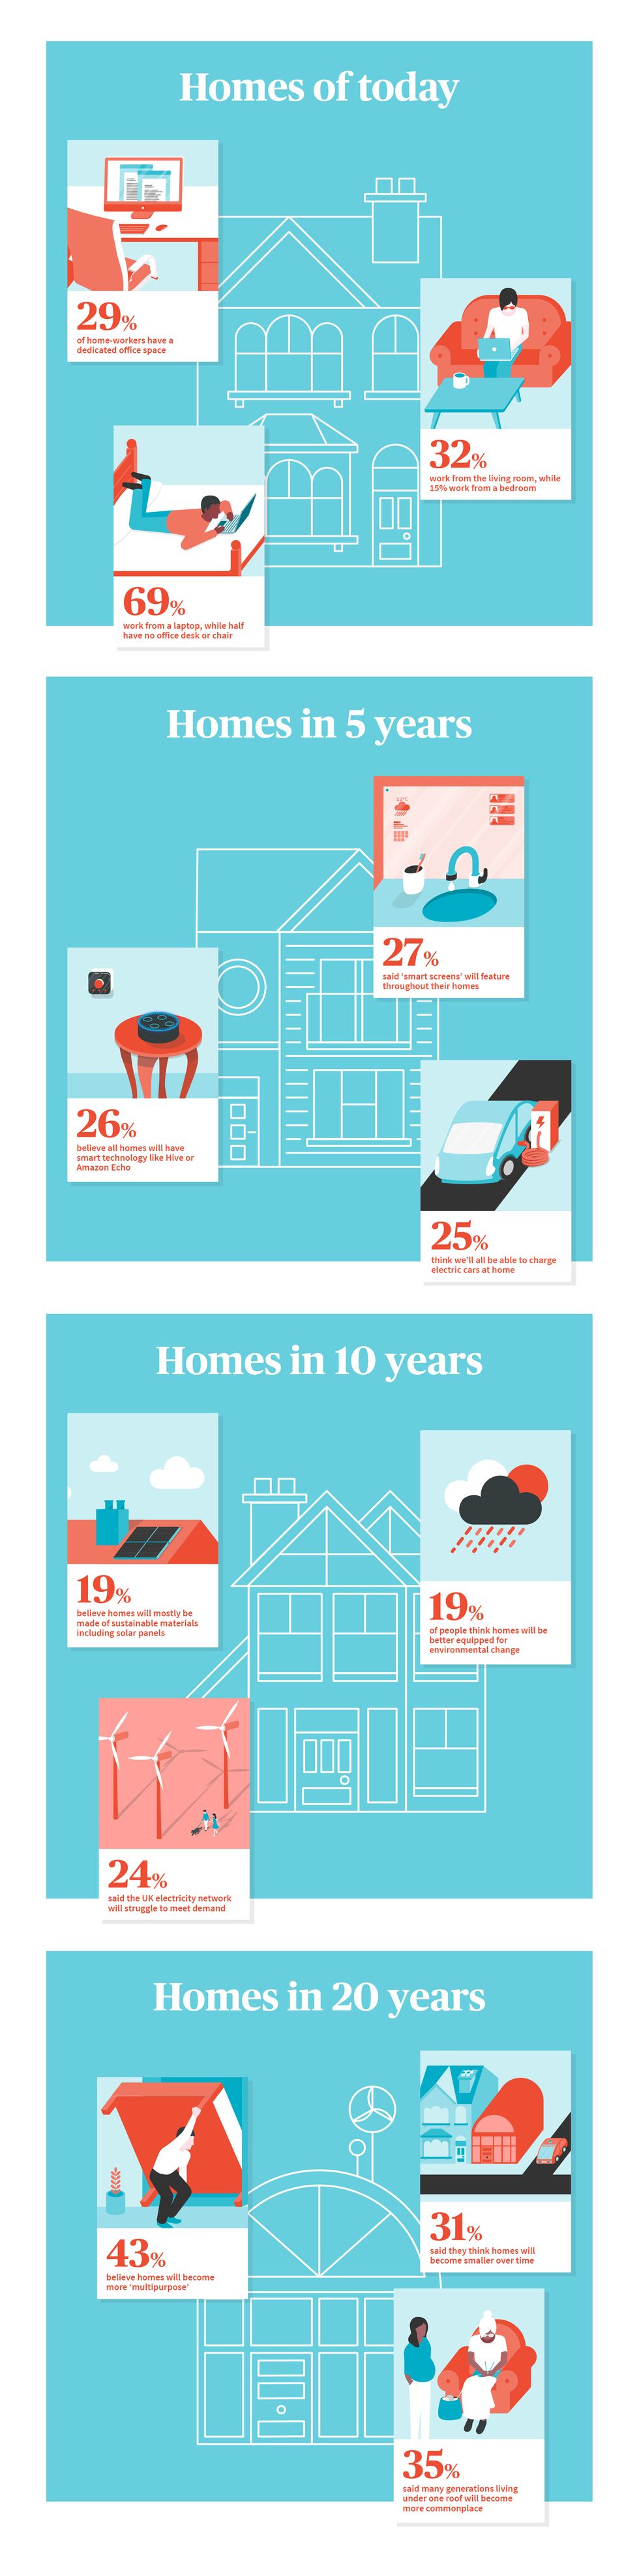 AXA Insurance - Homes of the future infographic